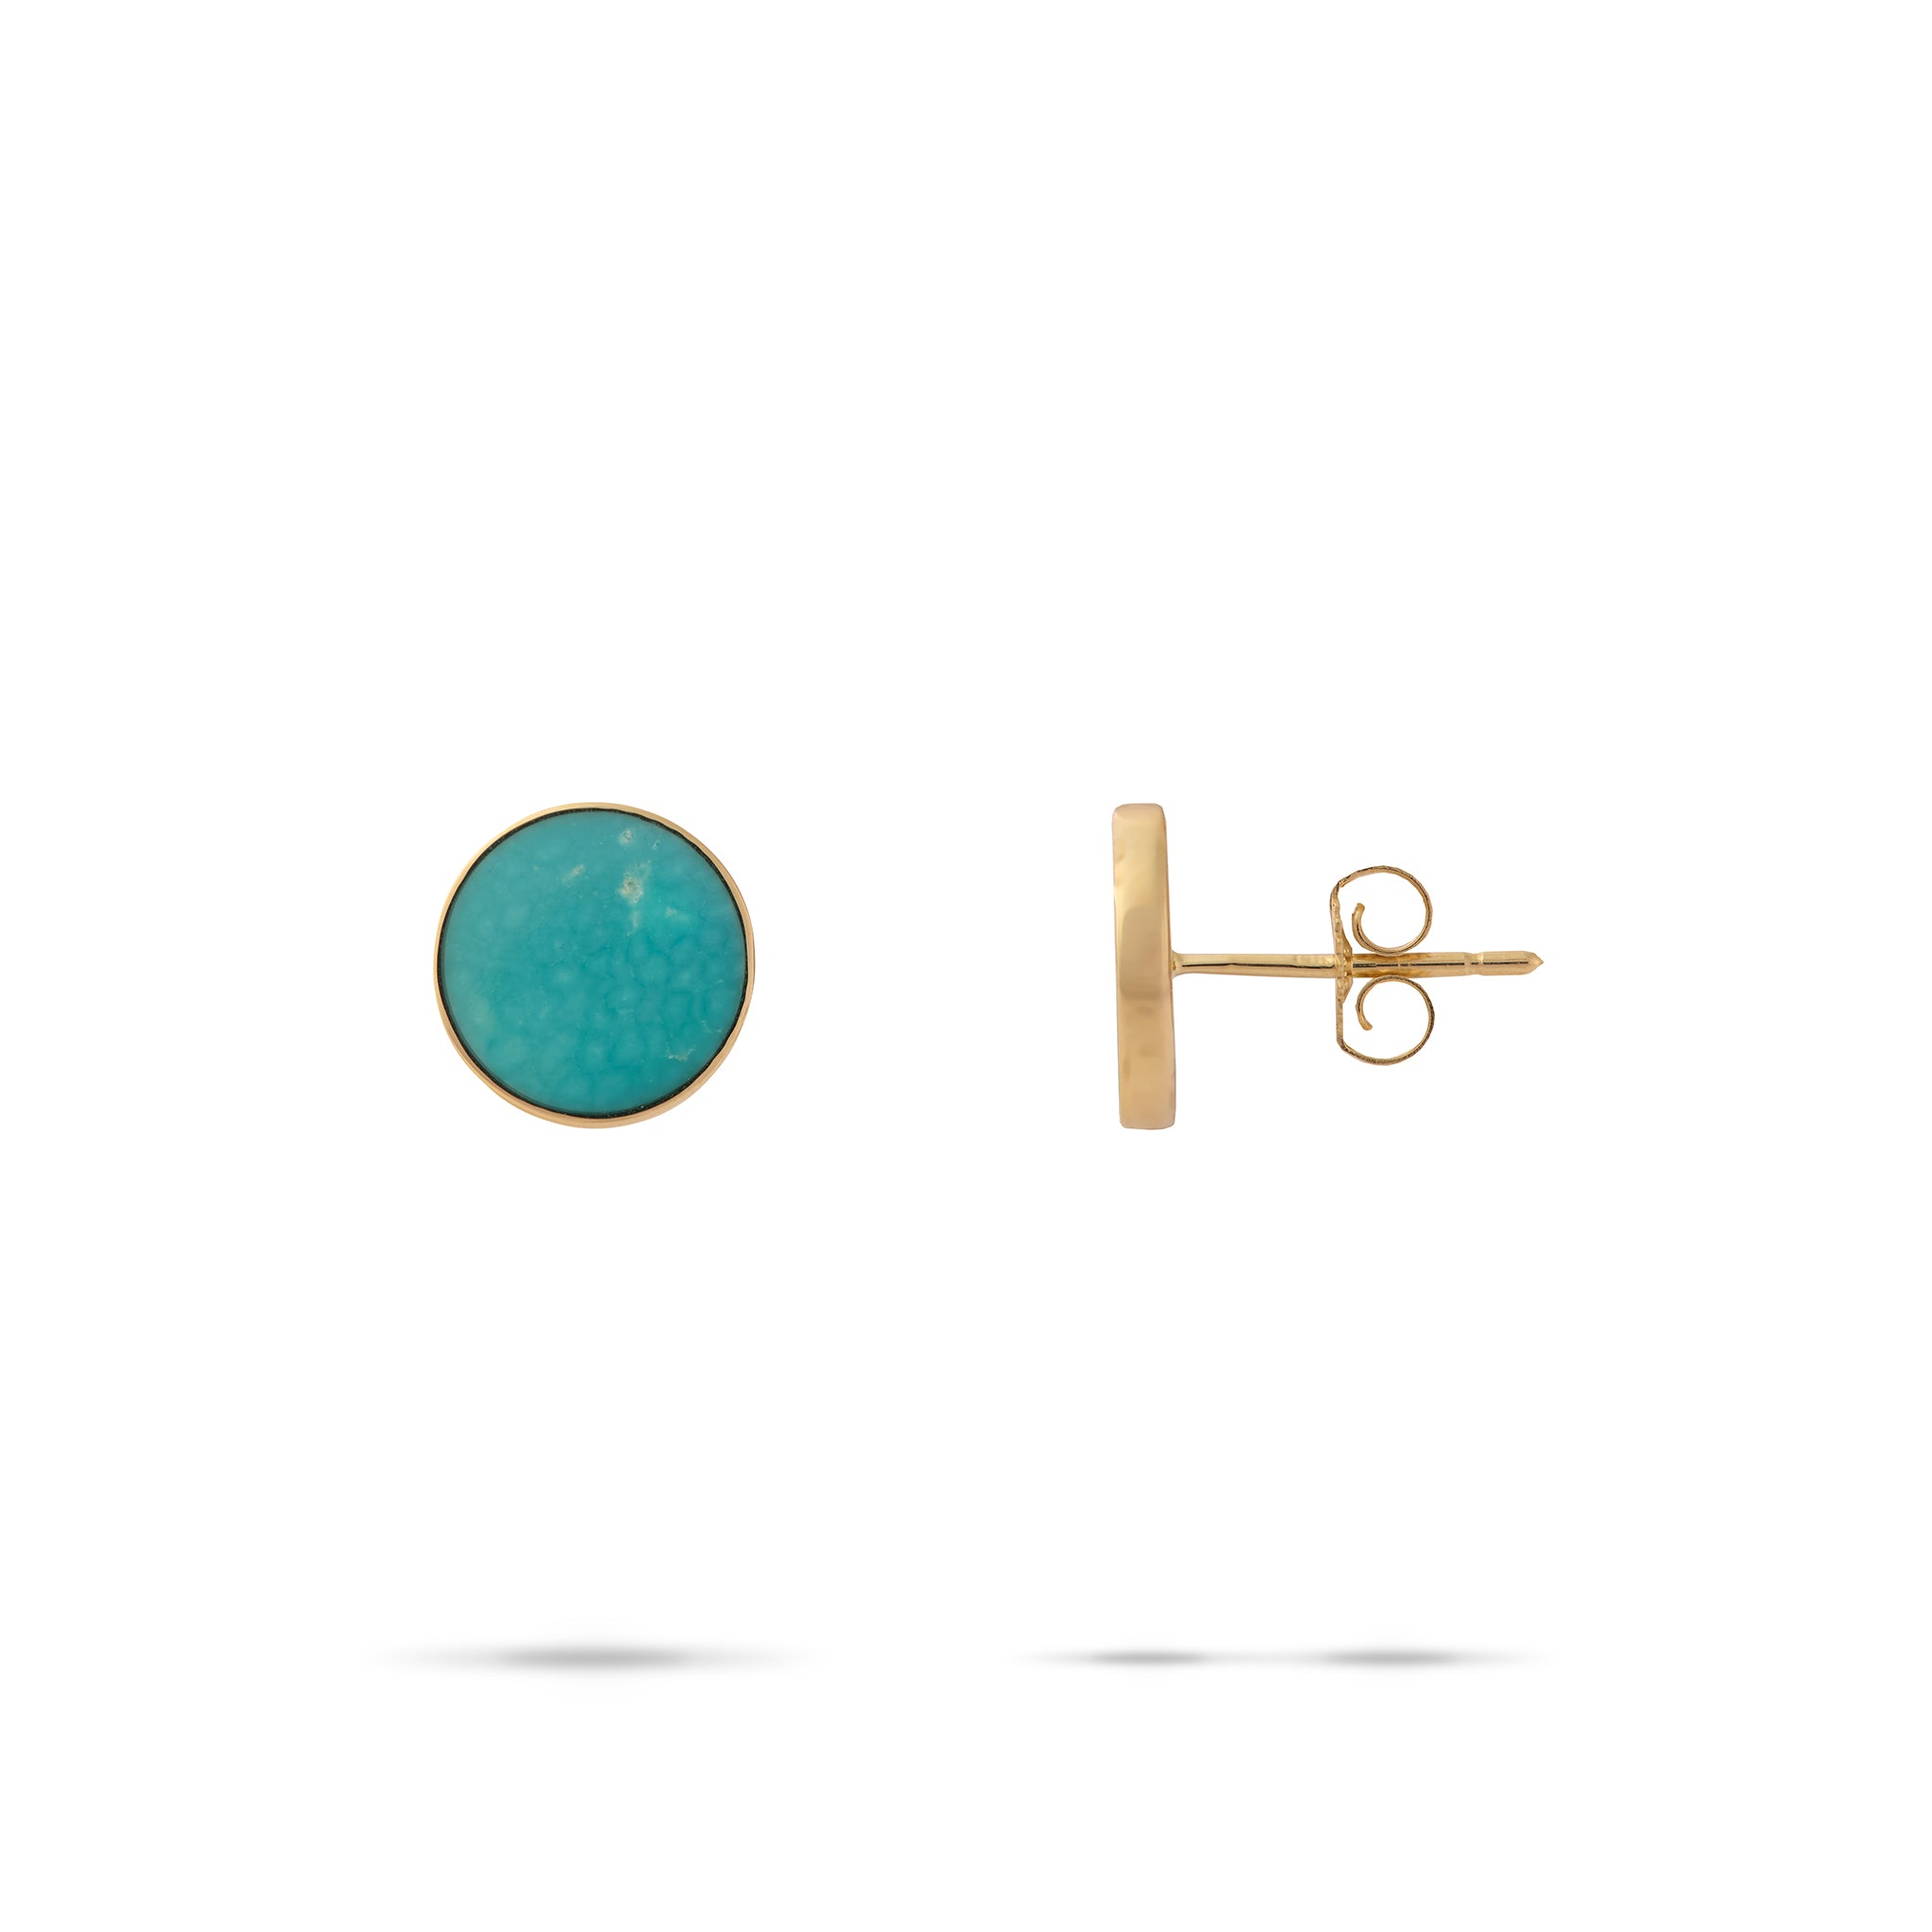 Eclipse Turquoise Earrings in Gold - 9mm